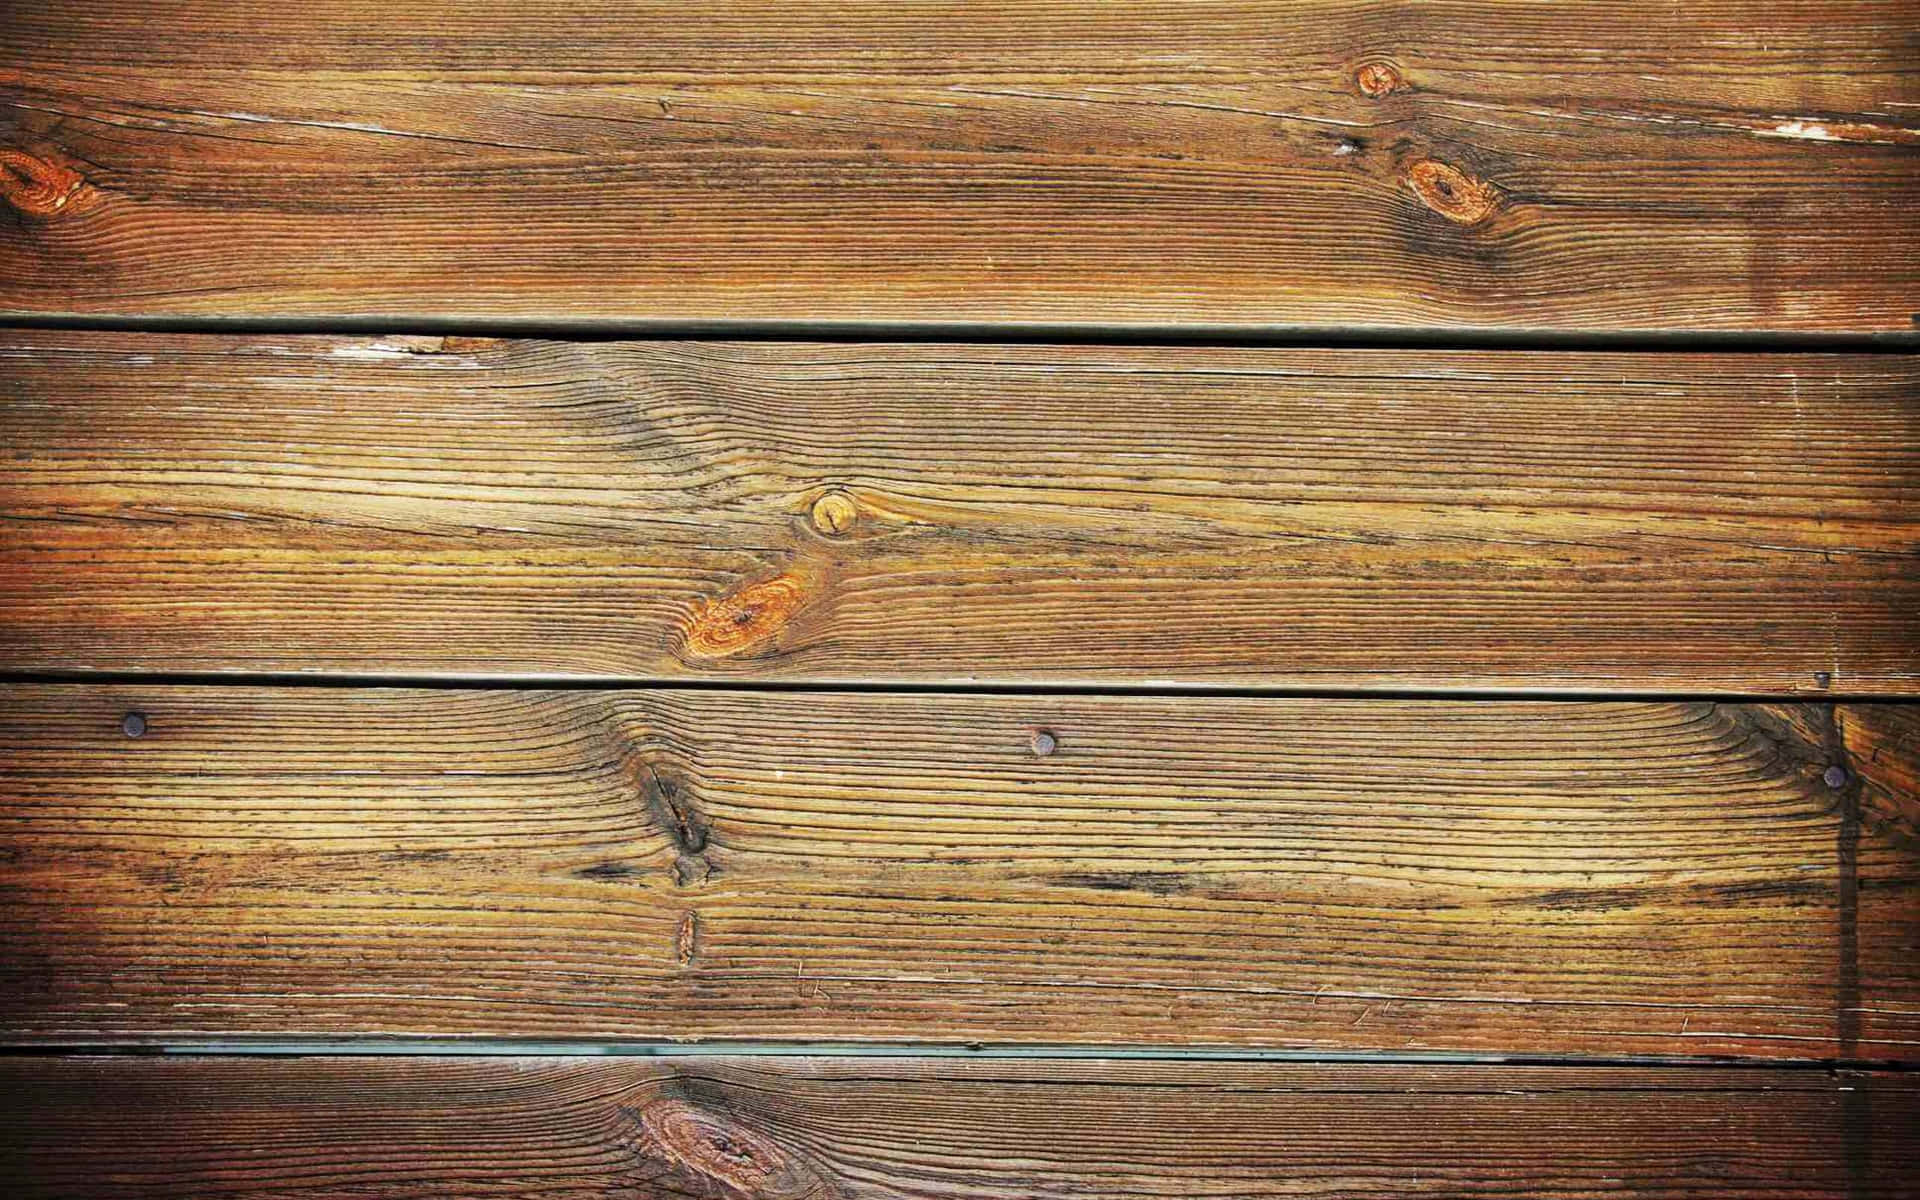 A Close Up Of A Wooden Plank